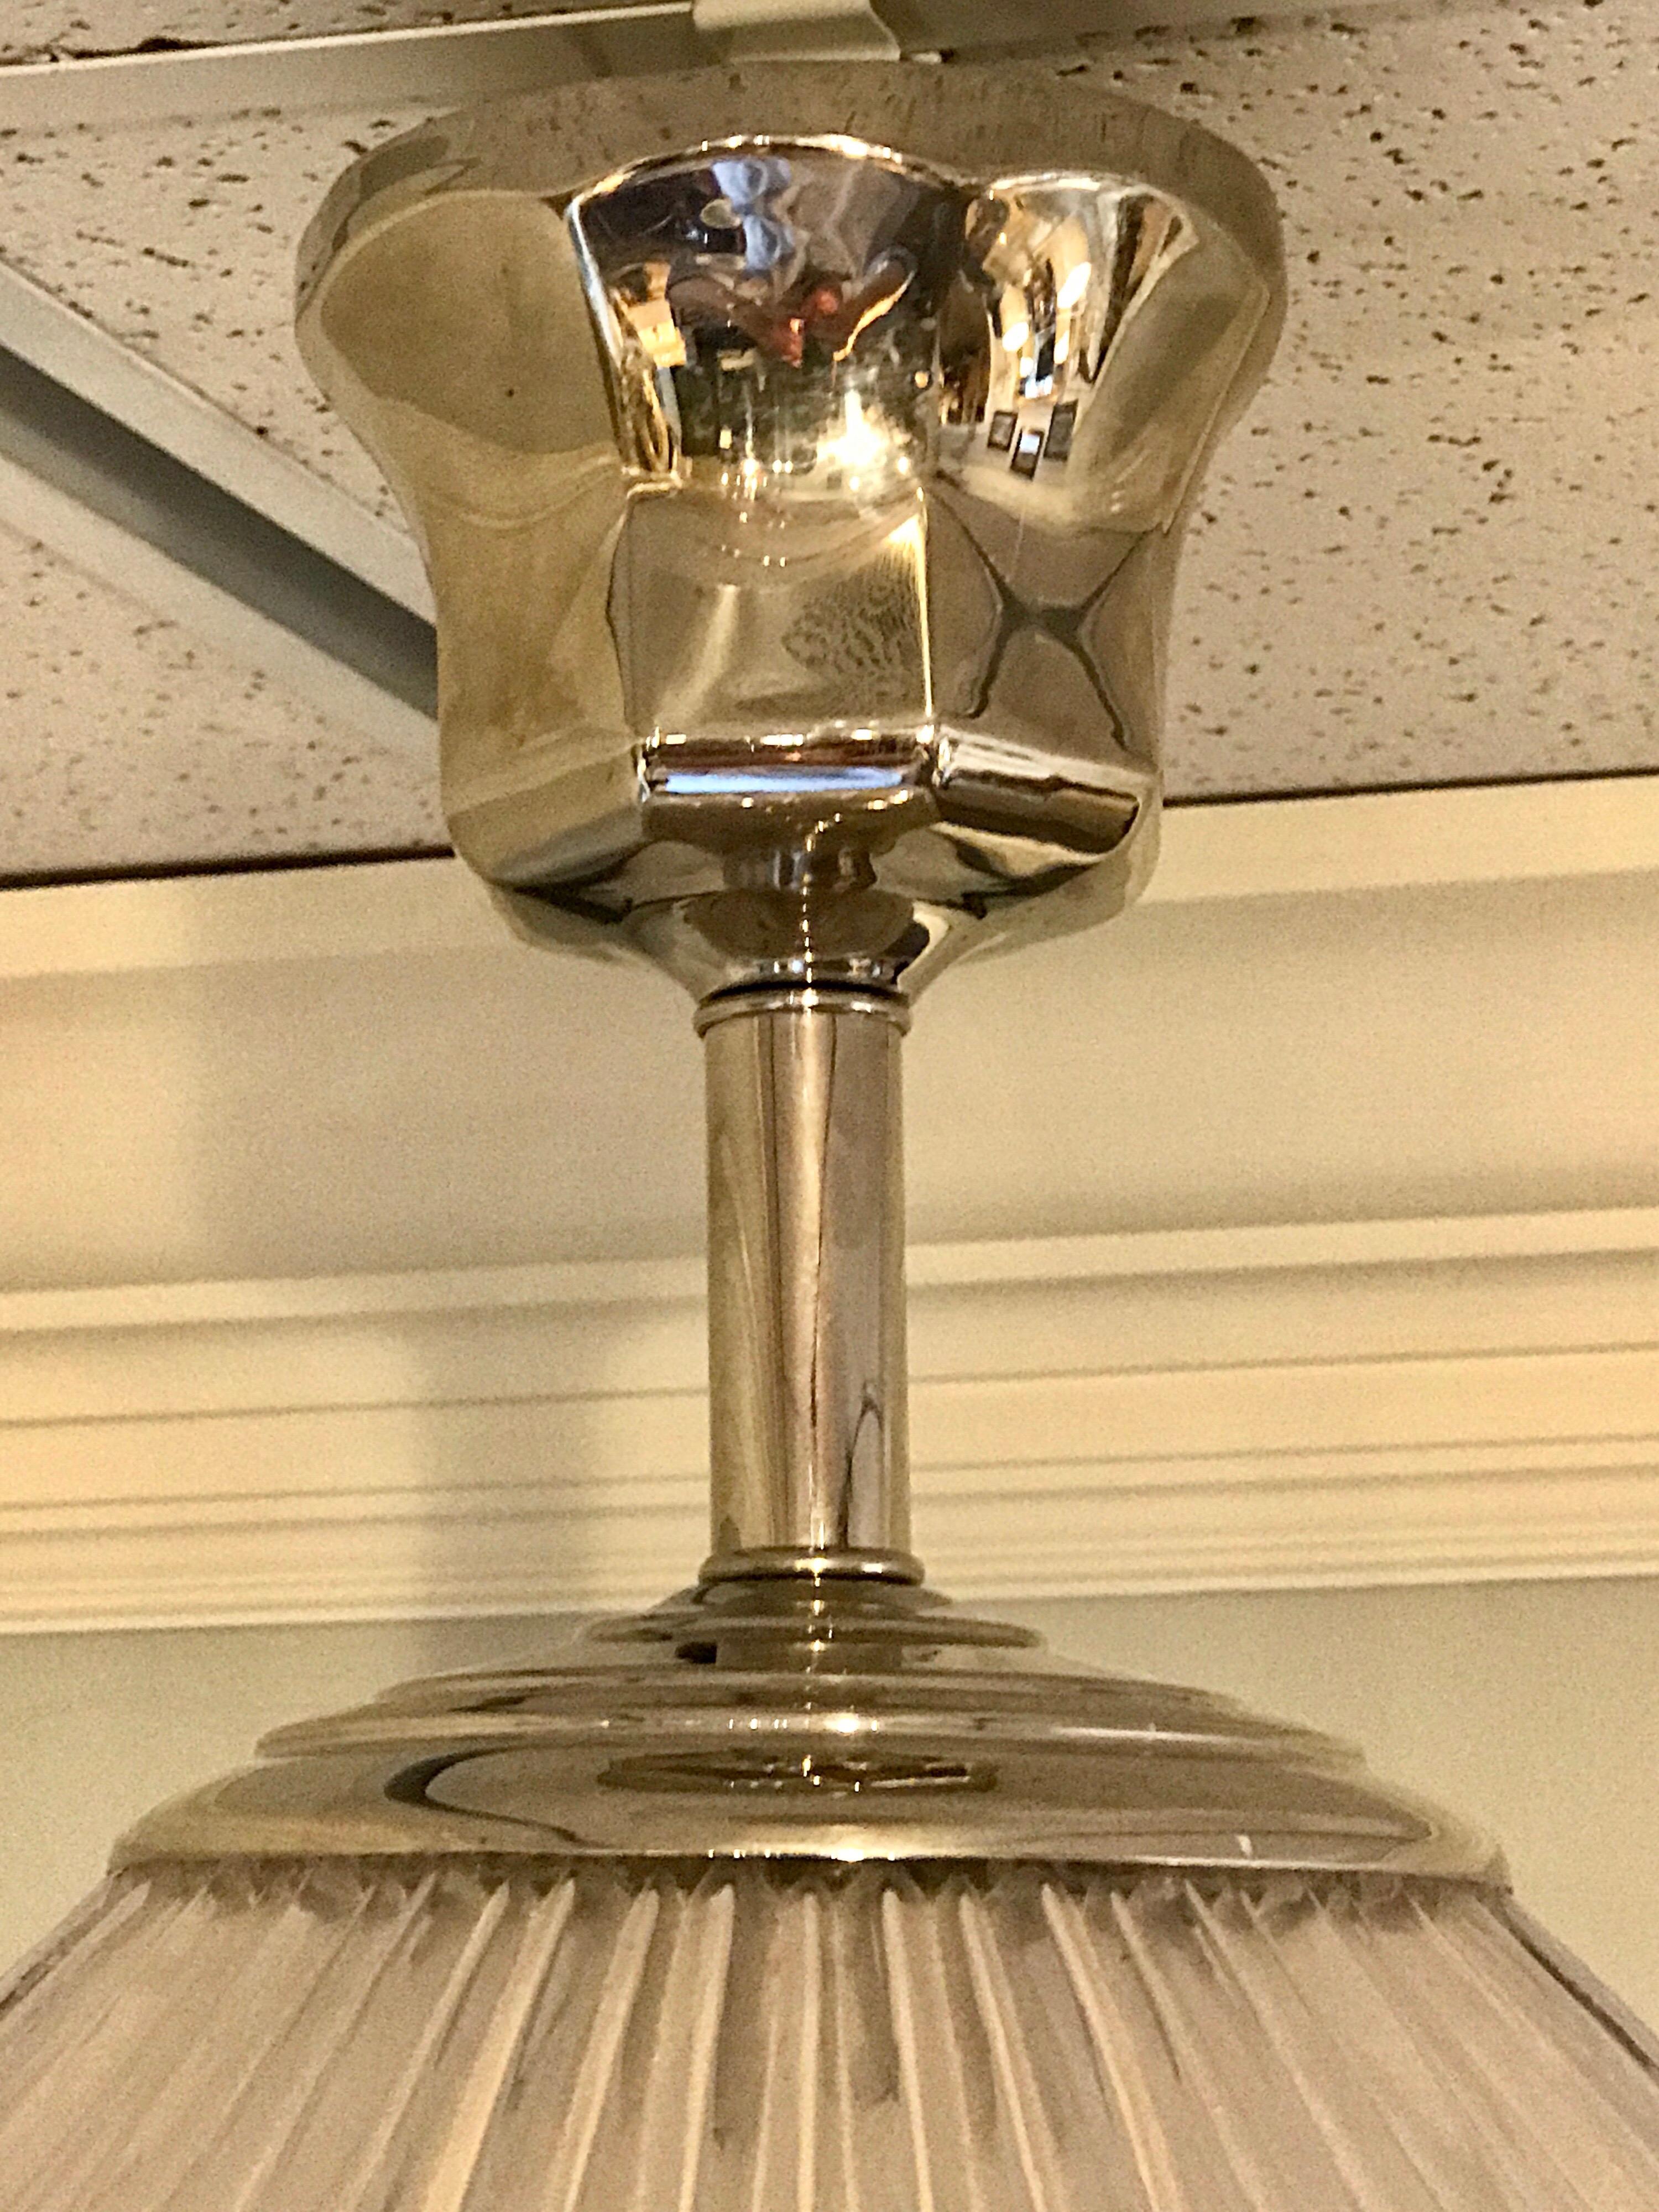 Polished nickel holophane glass pendant, with stylized mounts, good size vintage holophane glass shade, takes one standard bulb. Shown as a flush mount, chain can be added. Newly wired.
The shade alone measures 18